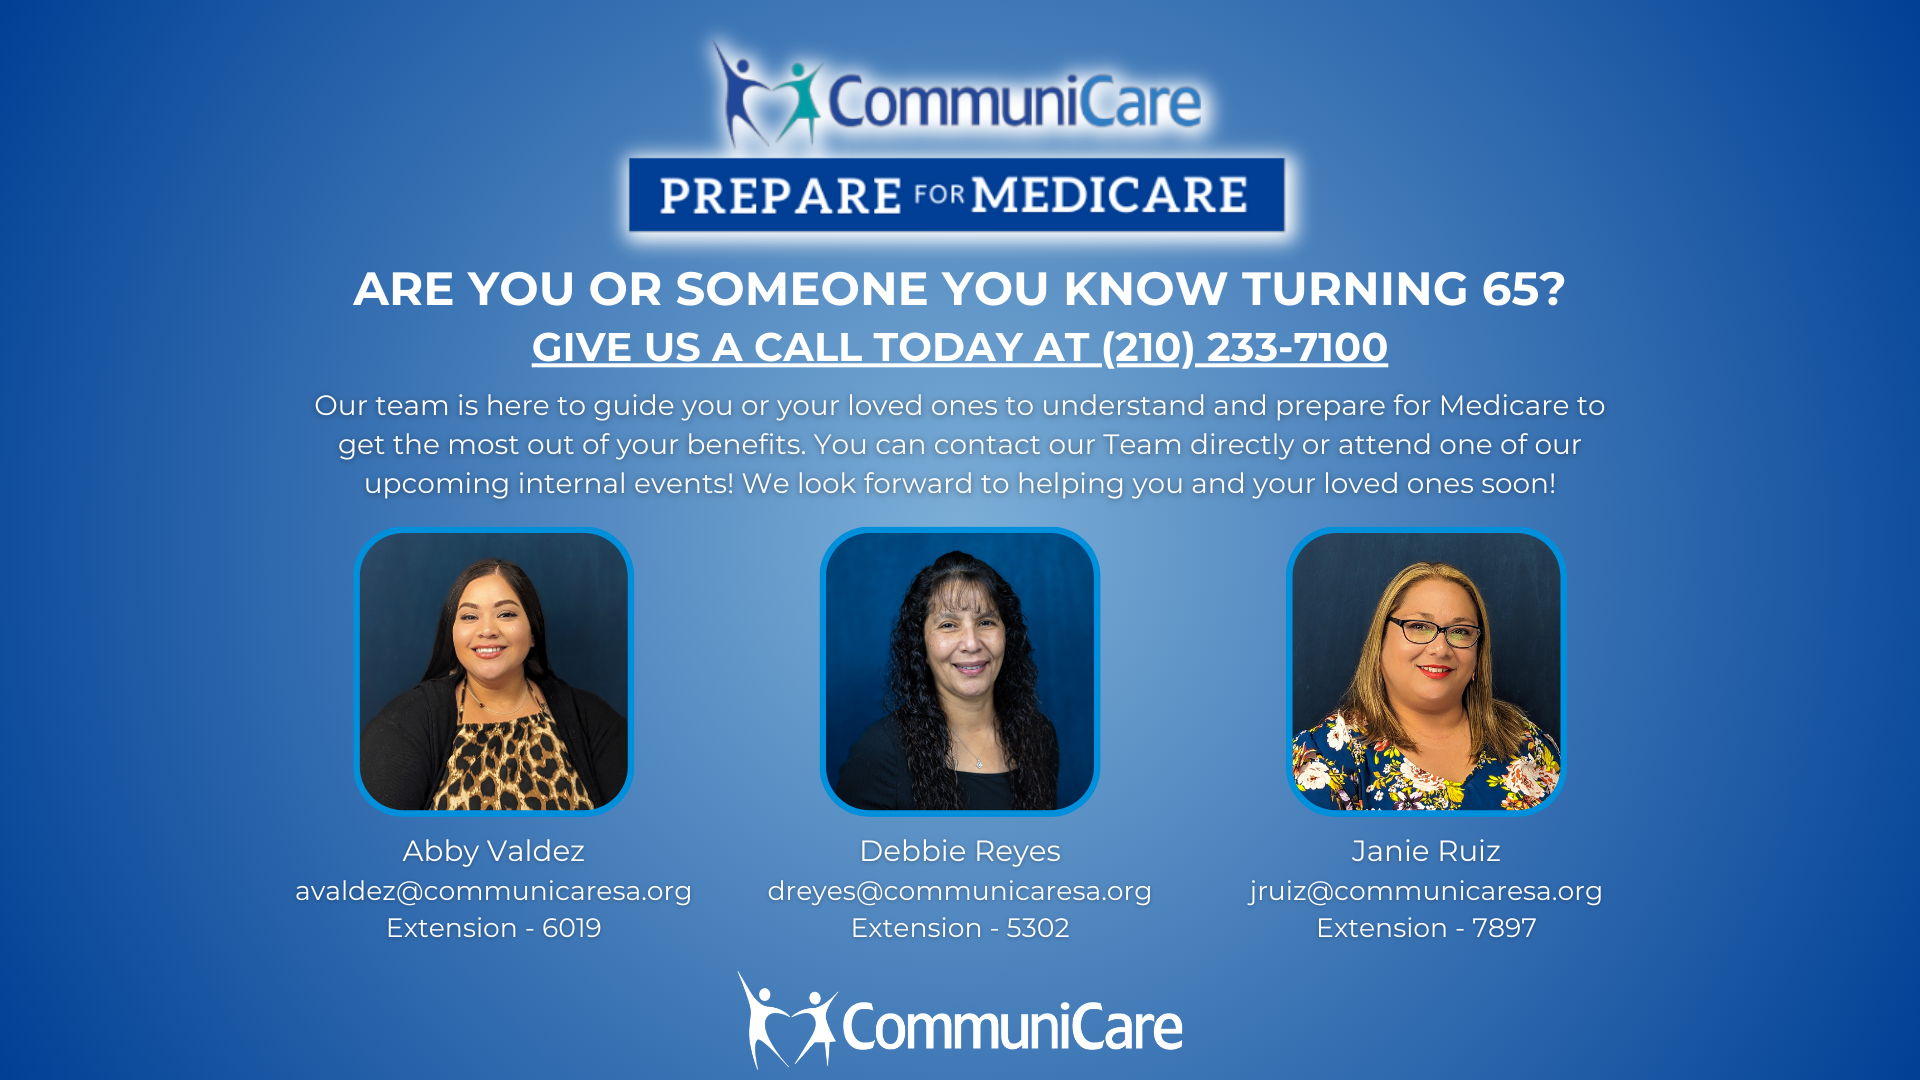 Prepare for Medicare | Are you or someone you know turning 65 years old? Give us a call at (210) 233-7100 for all your Medicare questions or concerns!